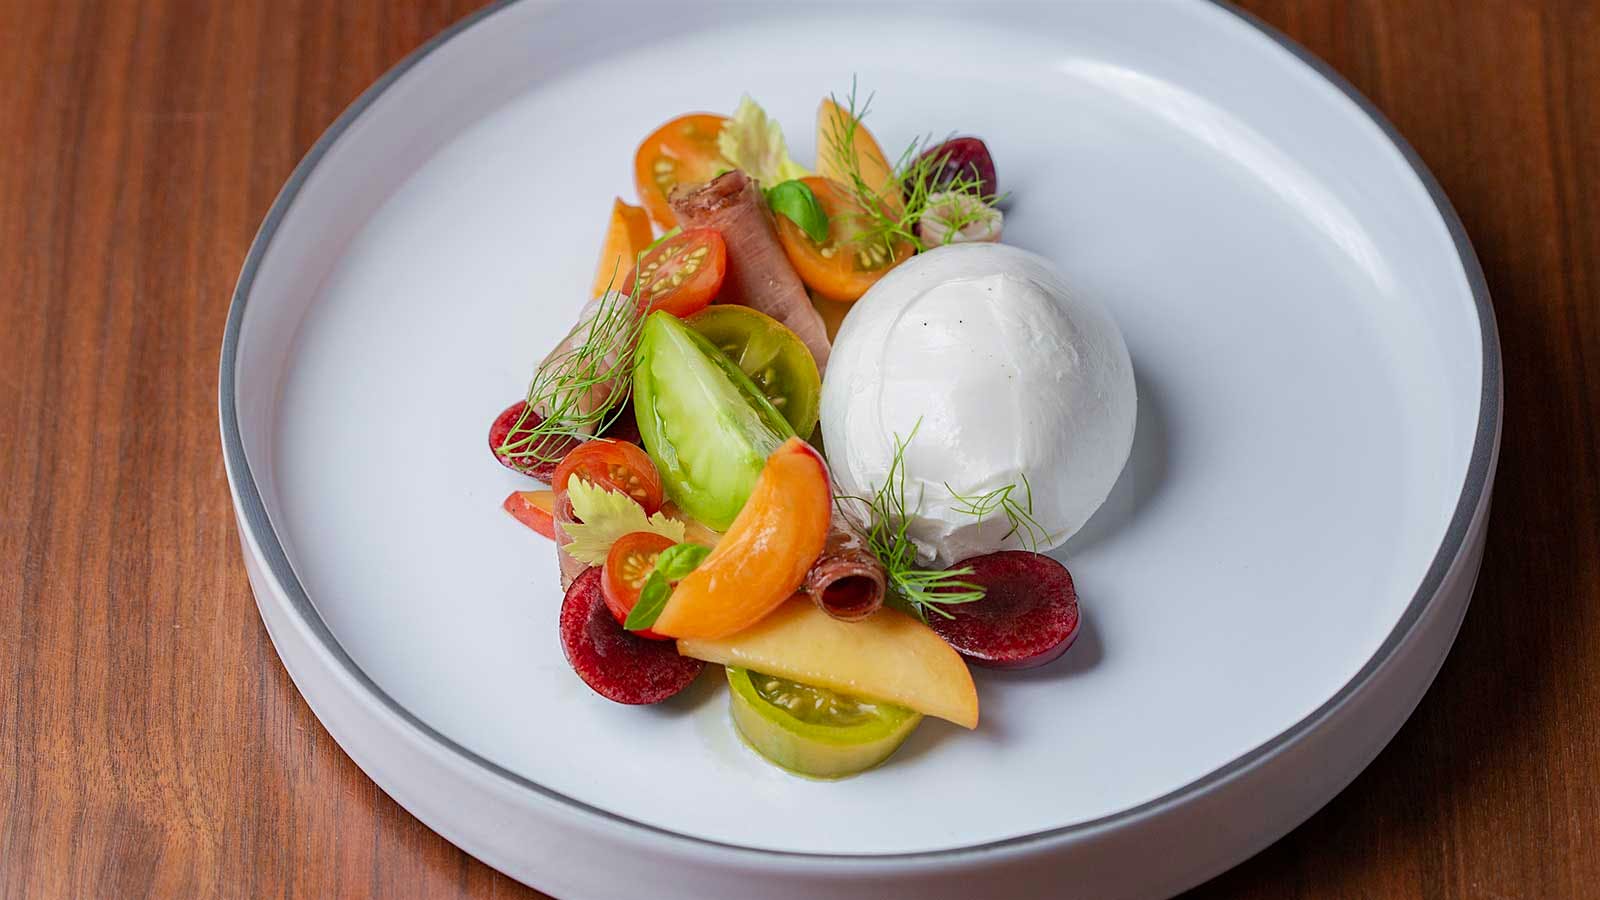 Burrata with cherry tomato and pickled cherry